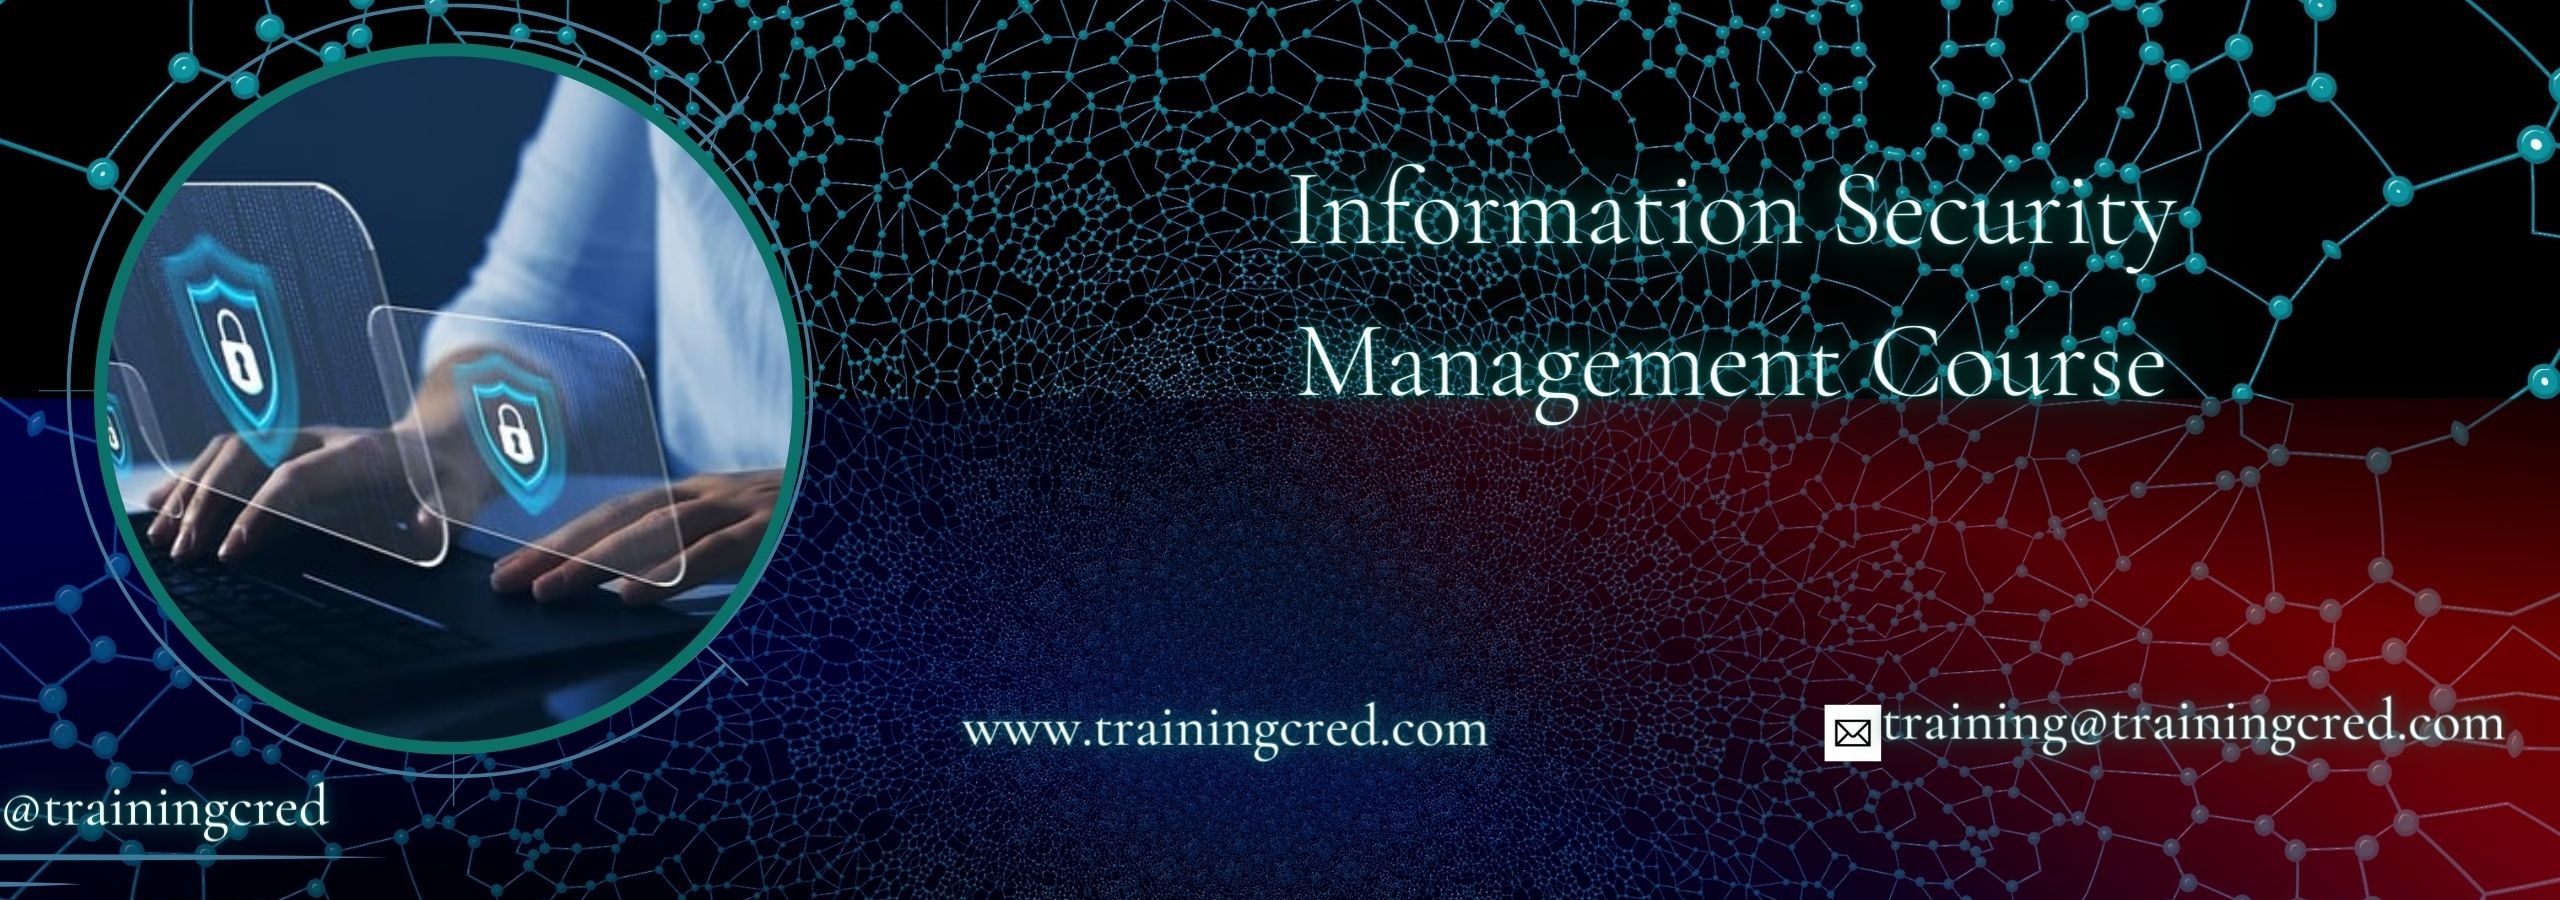 Information Security Management Training